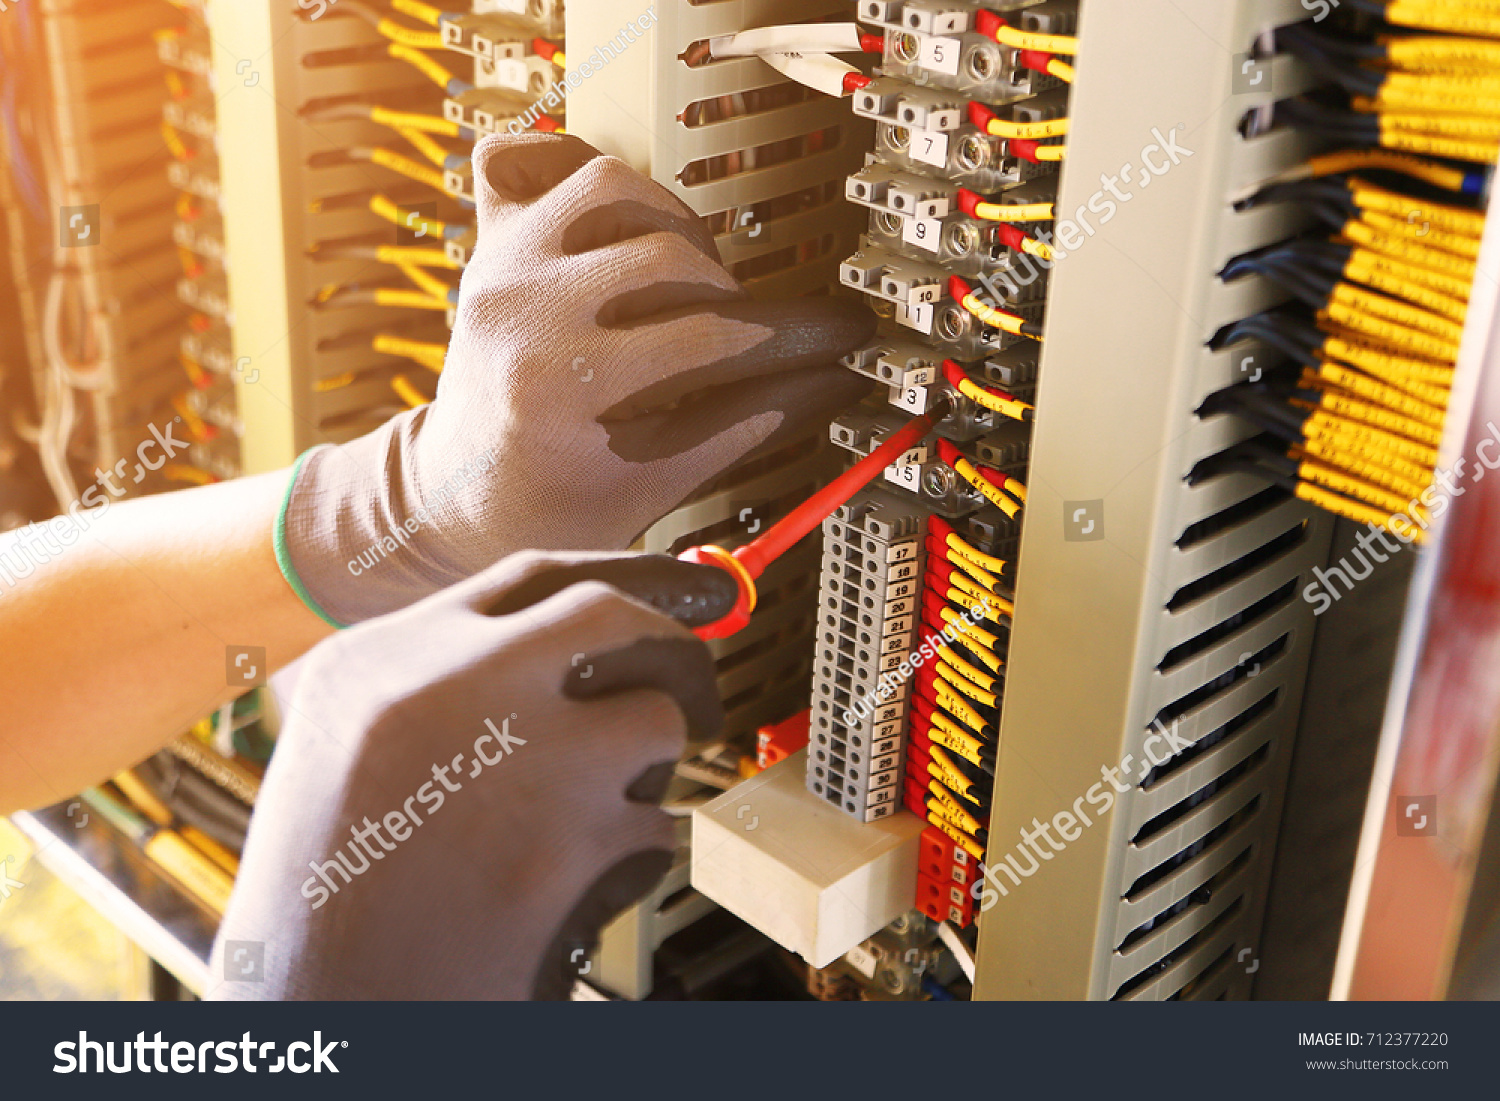 Electrical terminal in junction box and service by technician. Electrical device install in control panel for support program and control function by PLC. routine visit check equipment by technician. #712377220